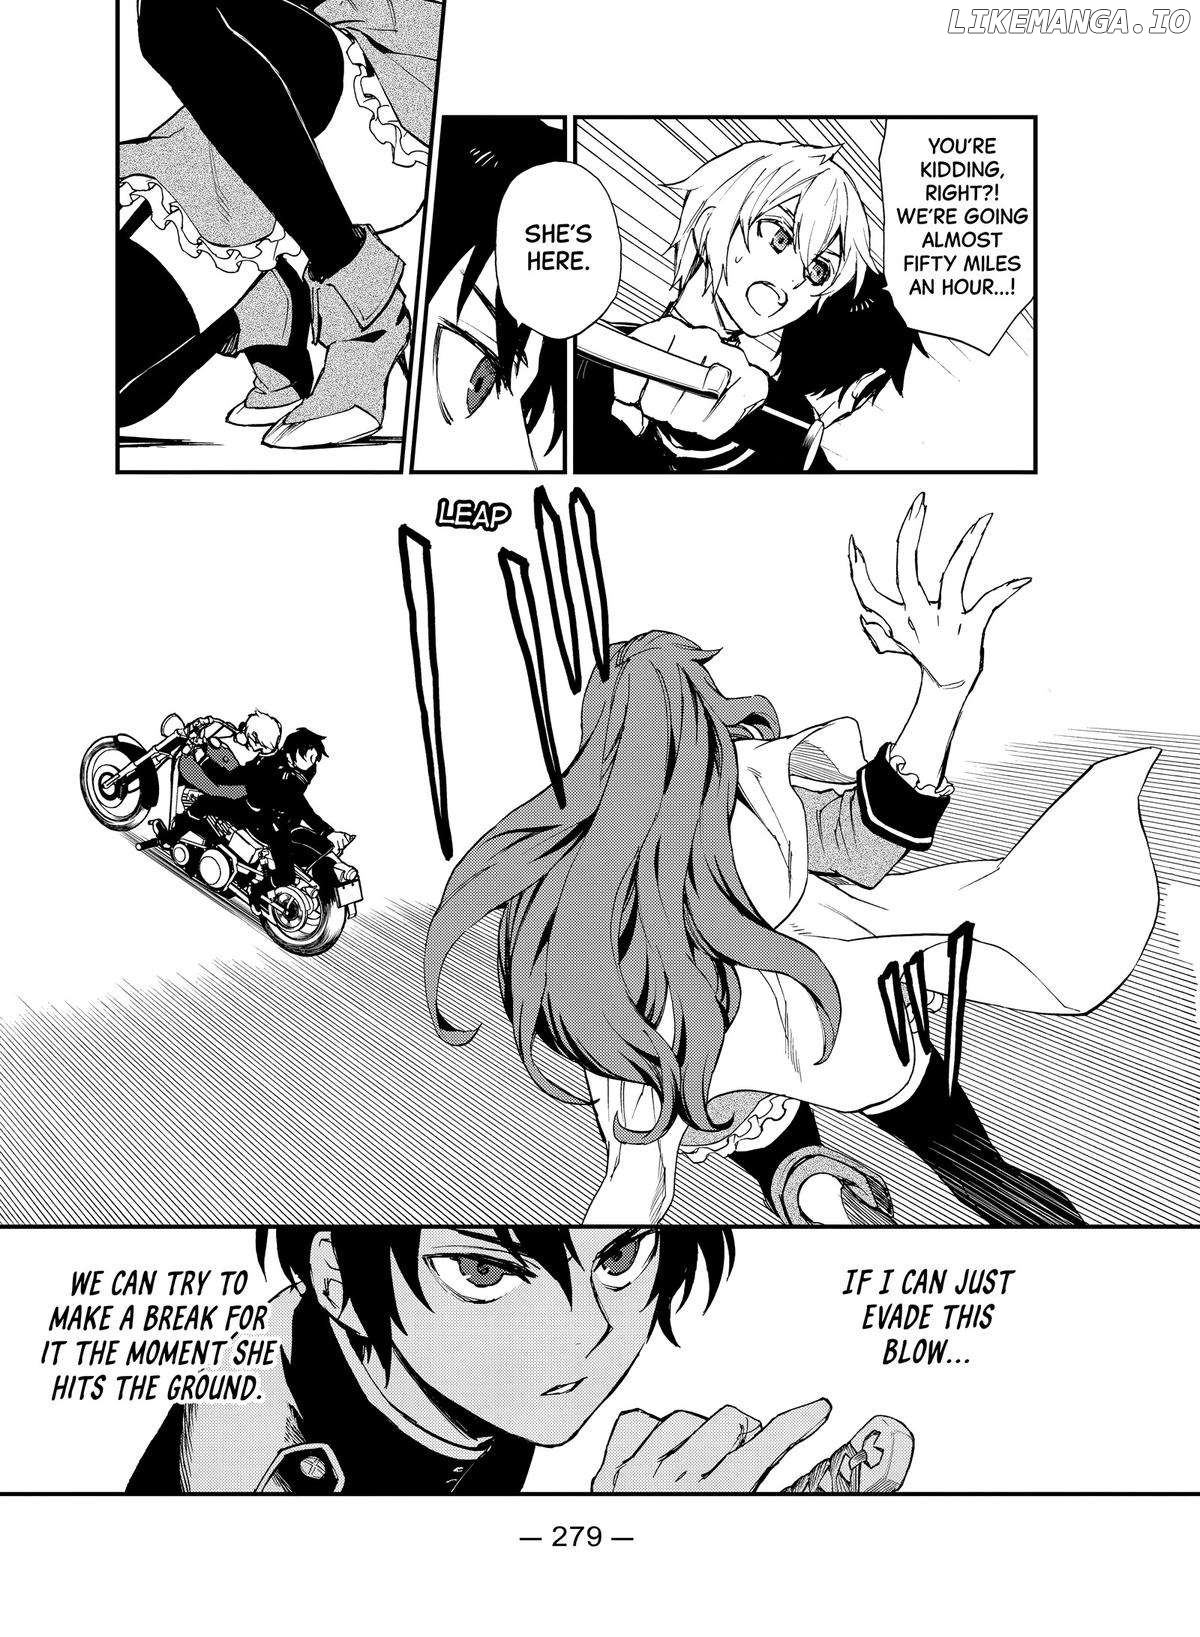 Seraph of the End: Guren Ichinose: Catastrophe at Sixteen Chapter 15 - page 15